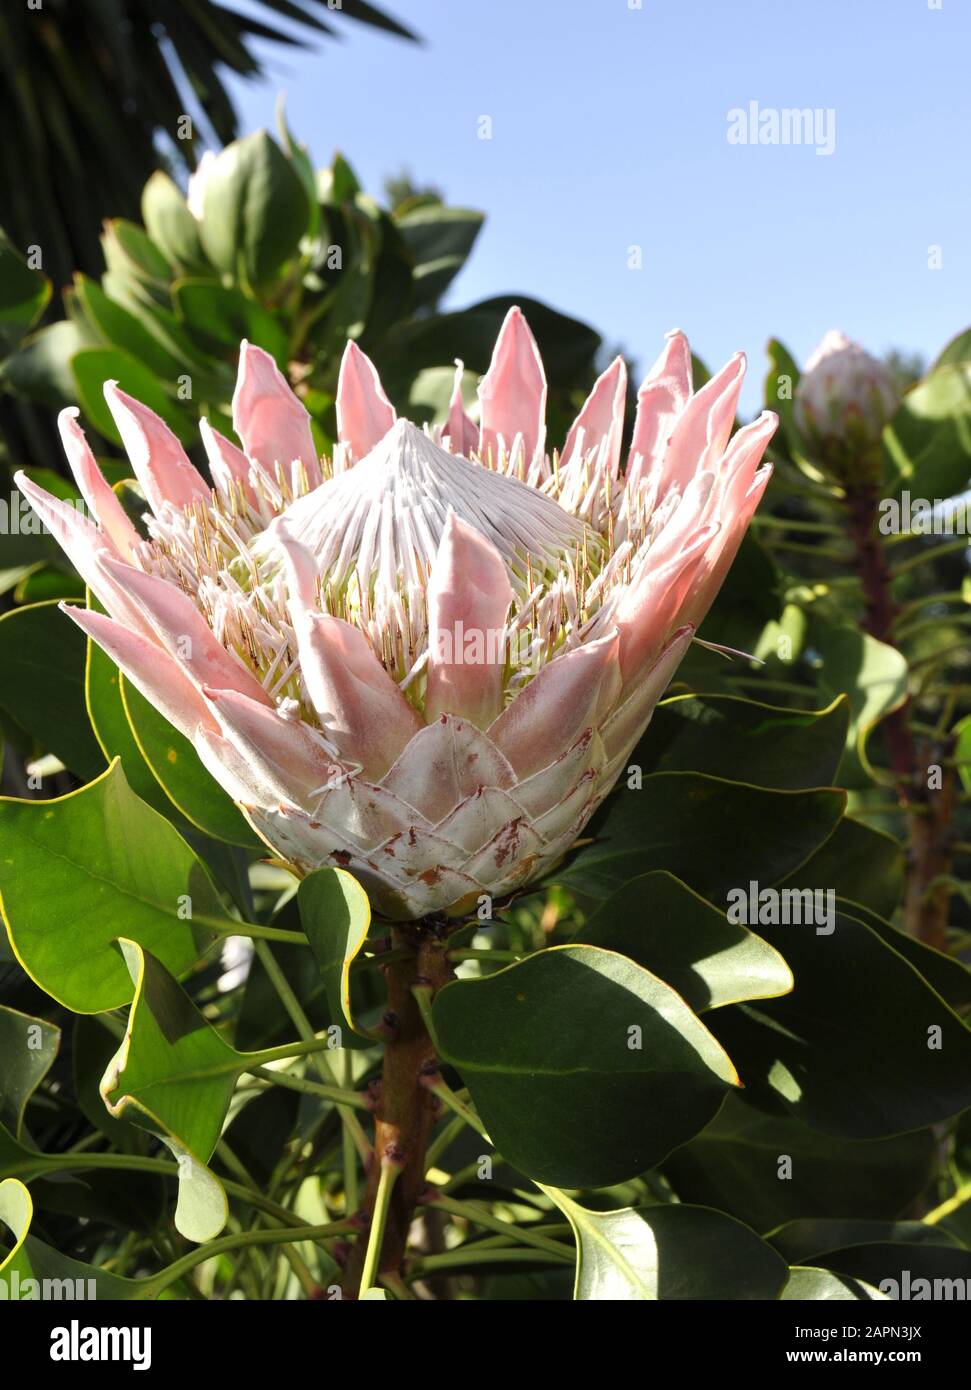 Closeup on the flower of a Protea plant Stock Photo